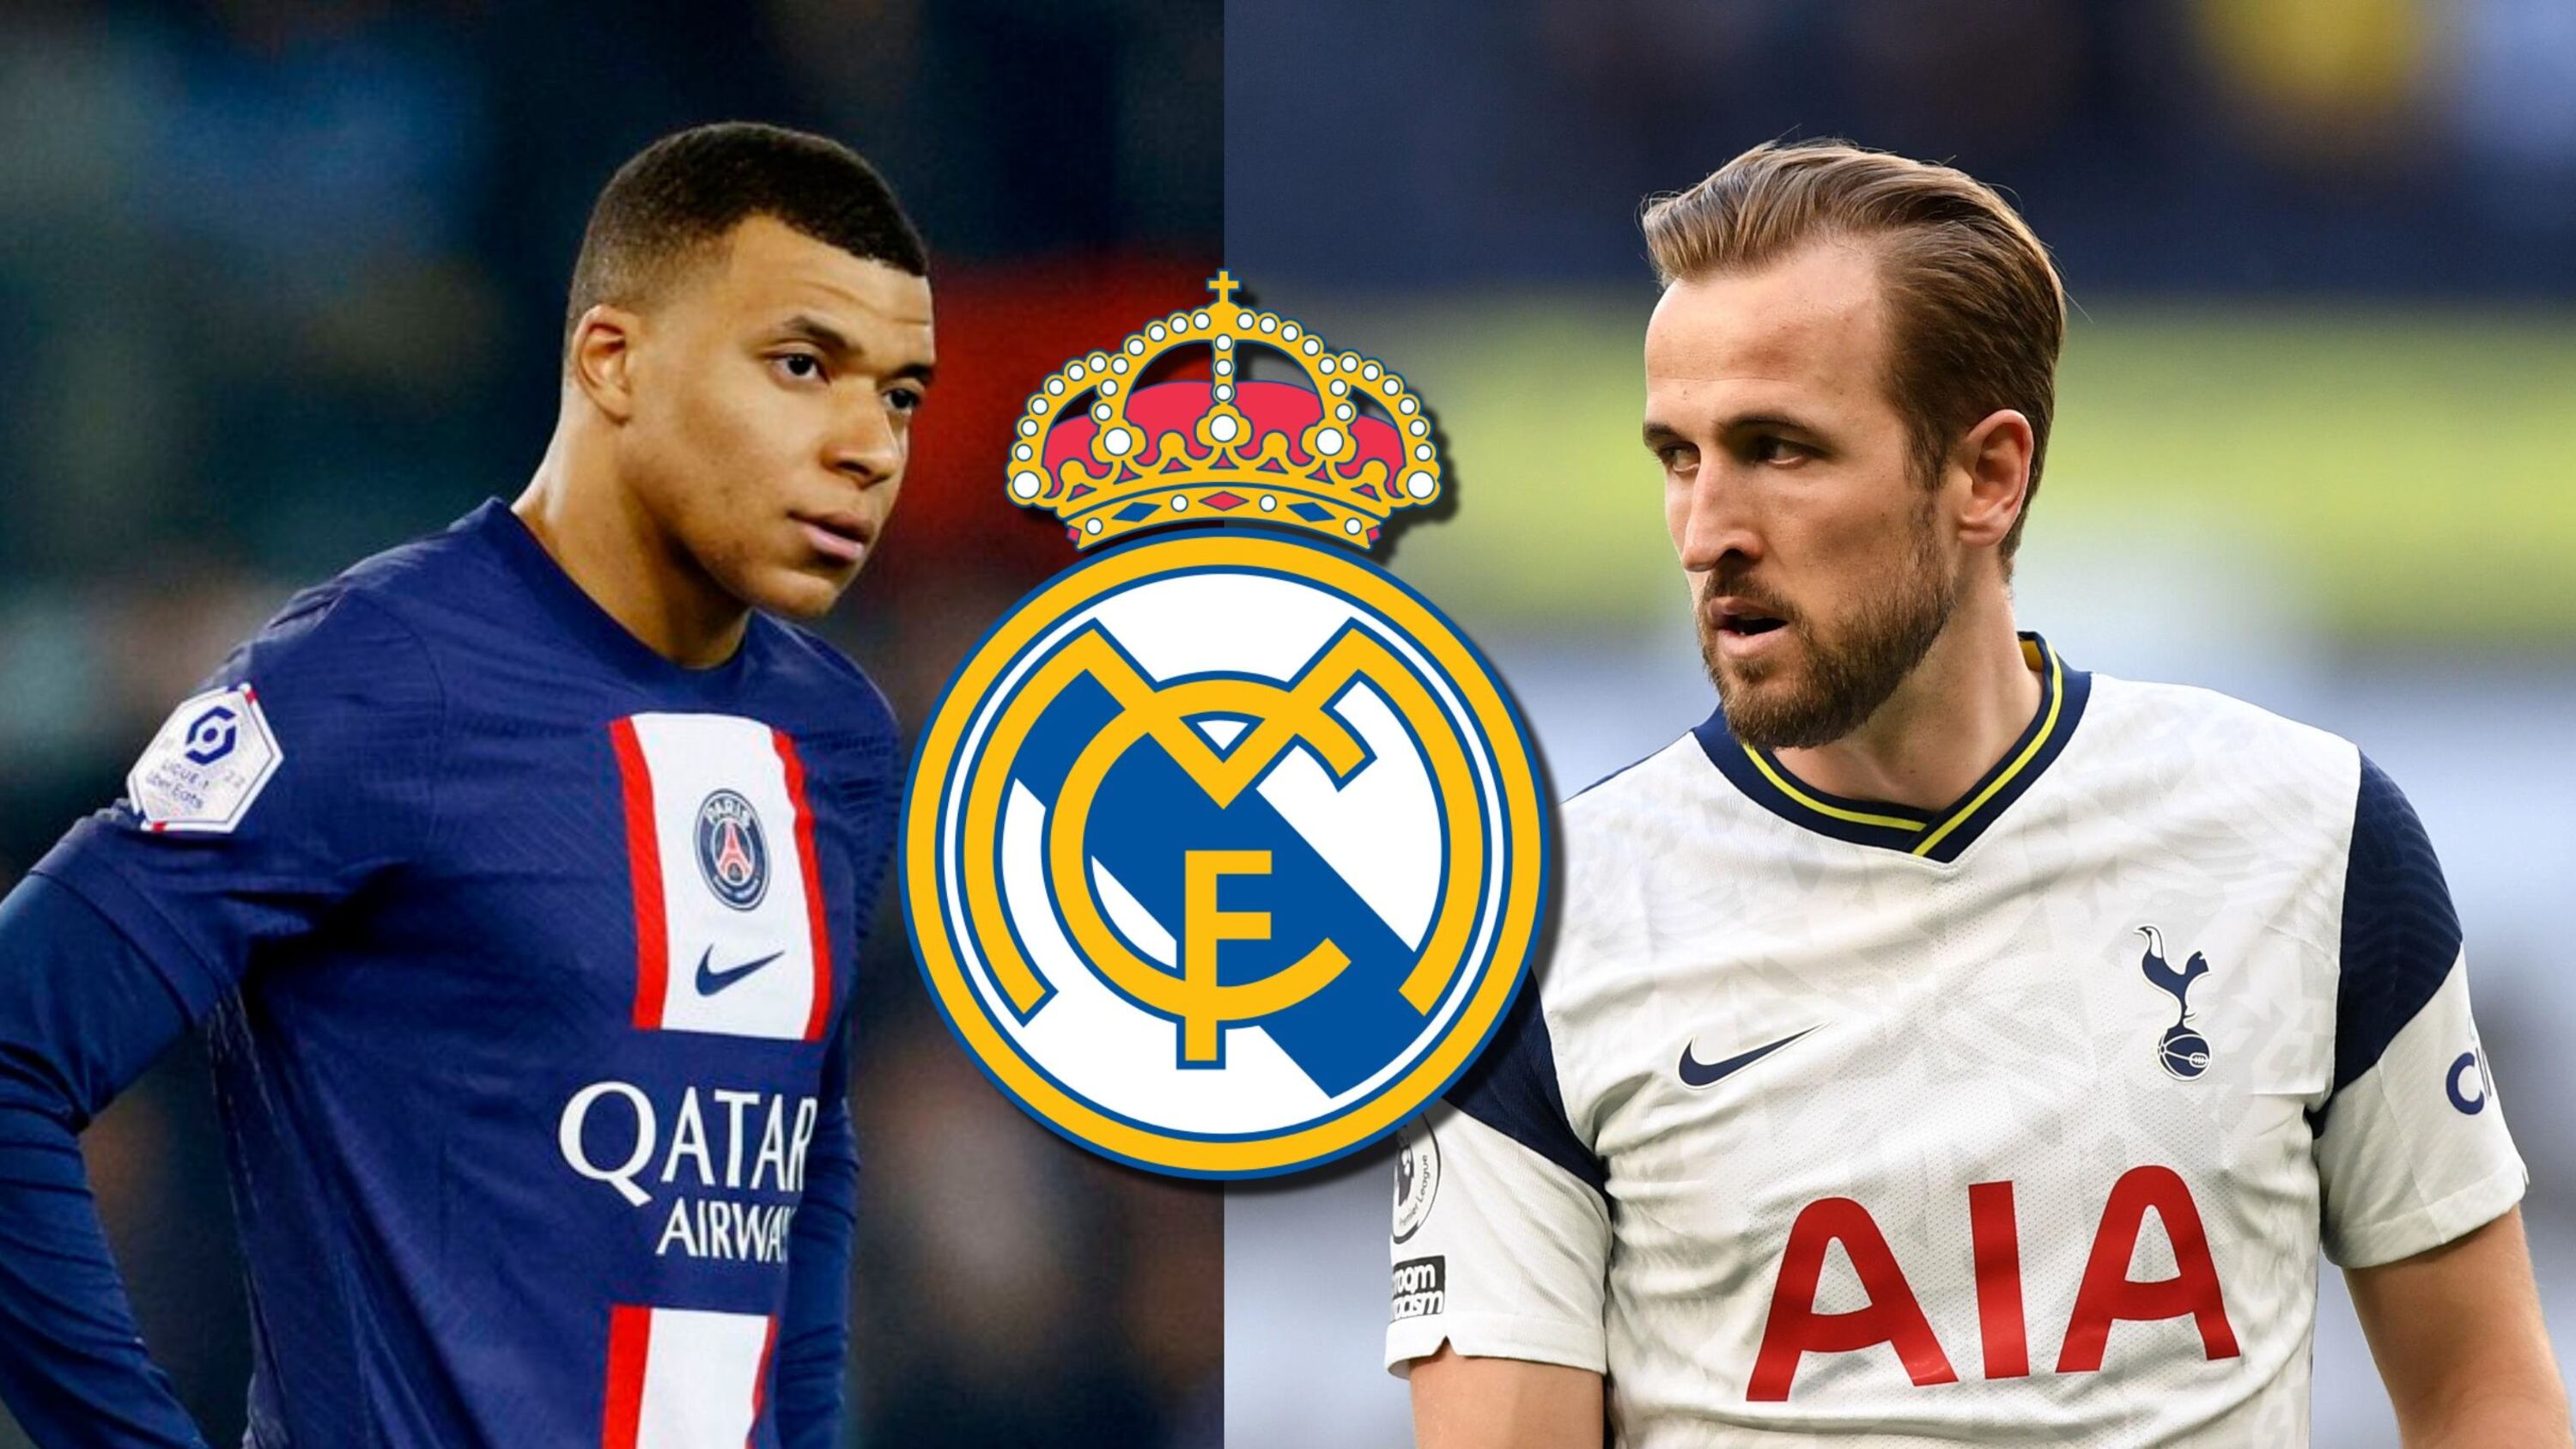 Neither Harry Kane nor Mbappe, Real Madrid signs Benzema's replacement and paralyzes Europe